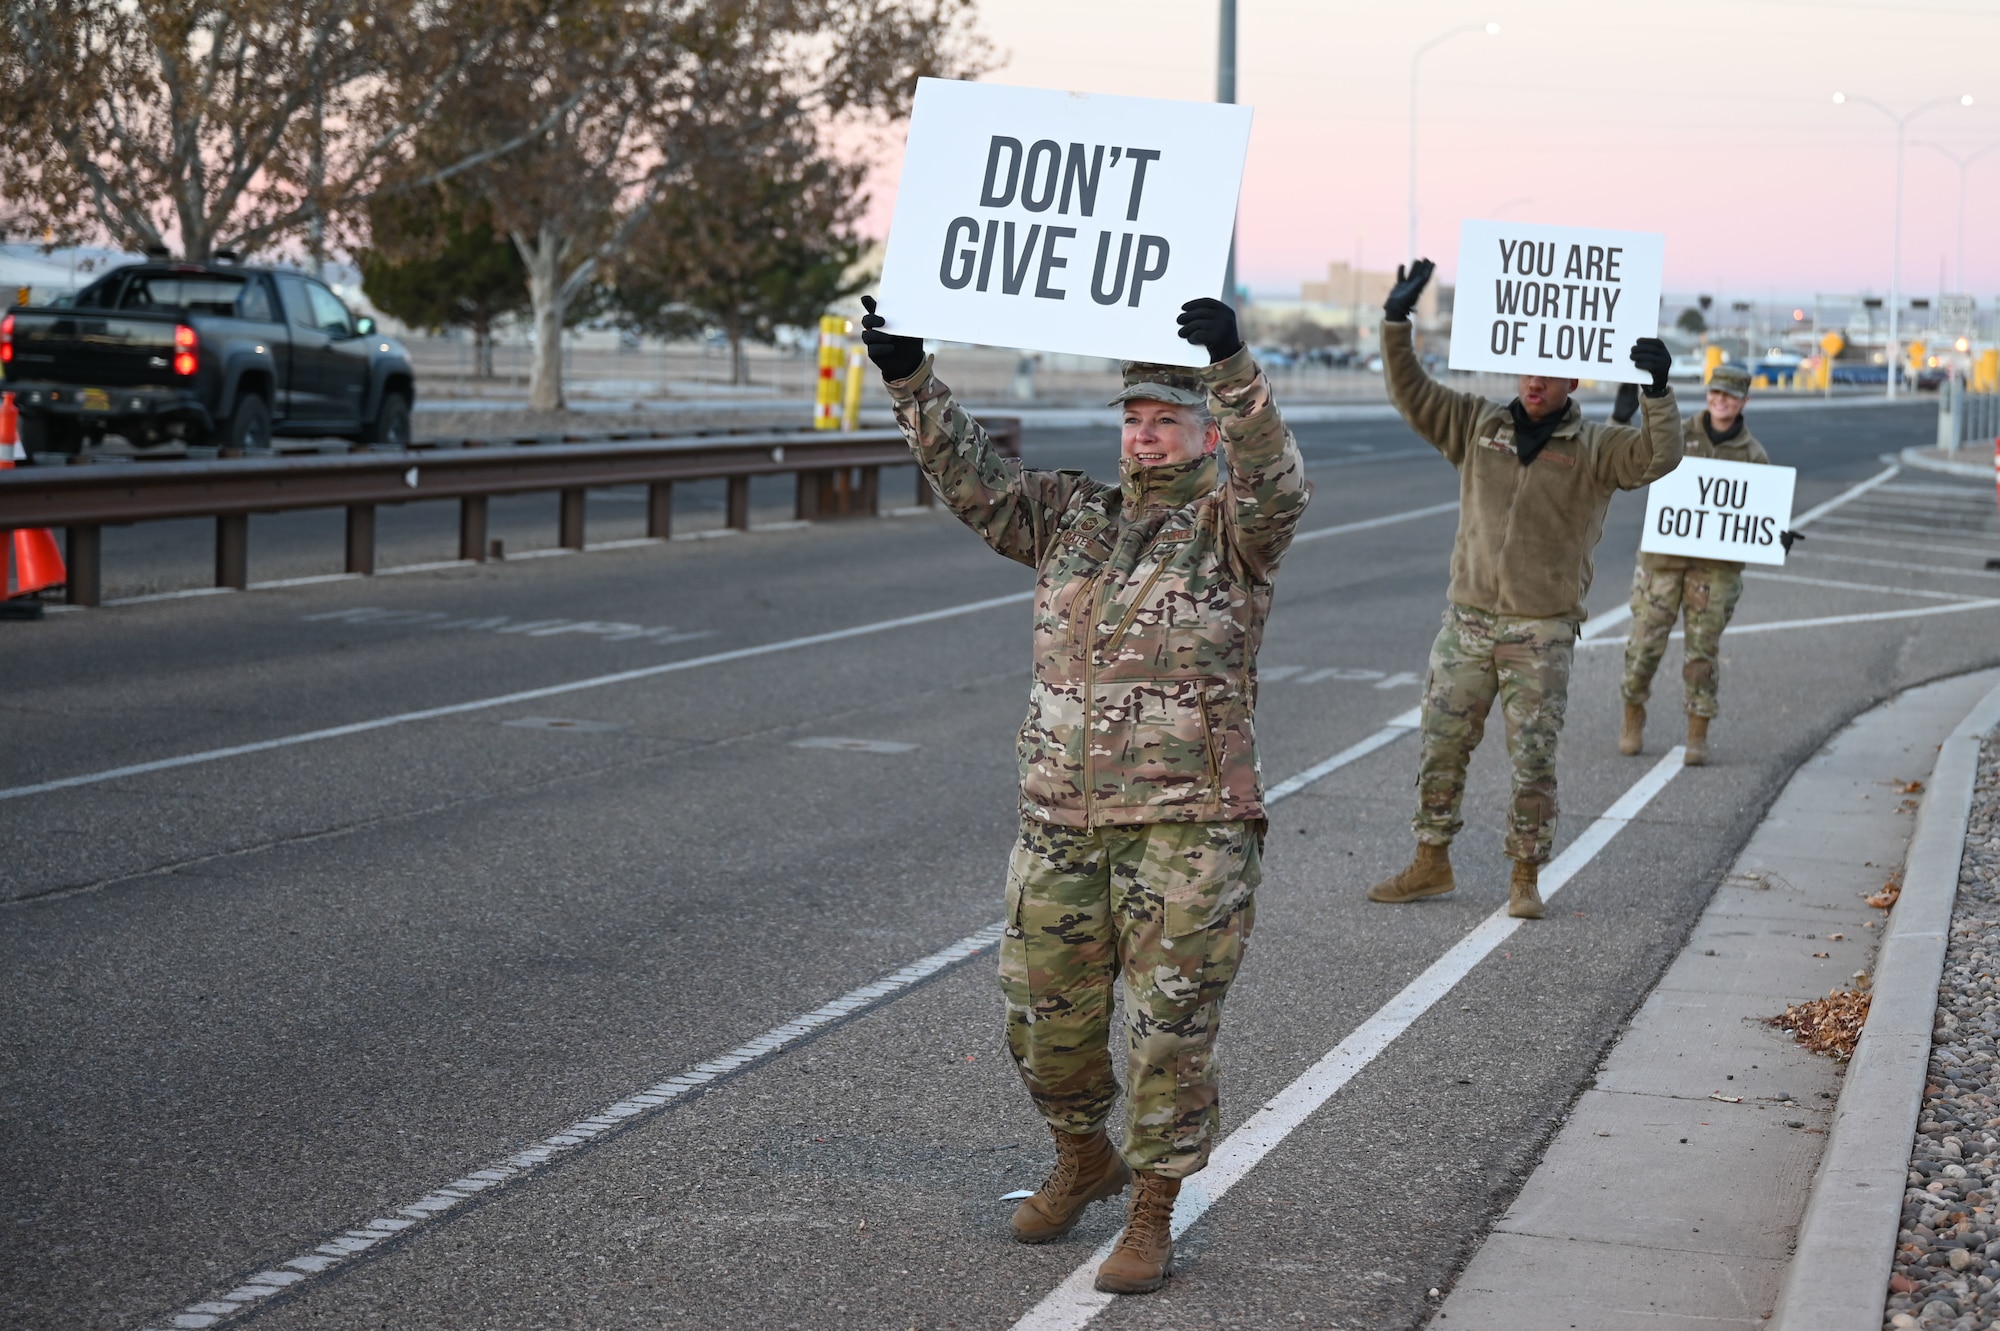 Three servicemembers hold signs with positive sayings at an installation gate.